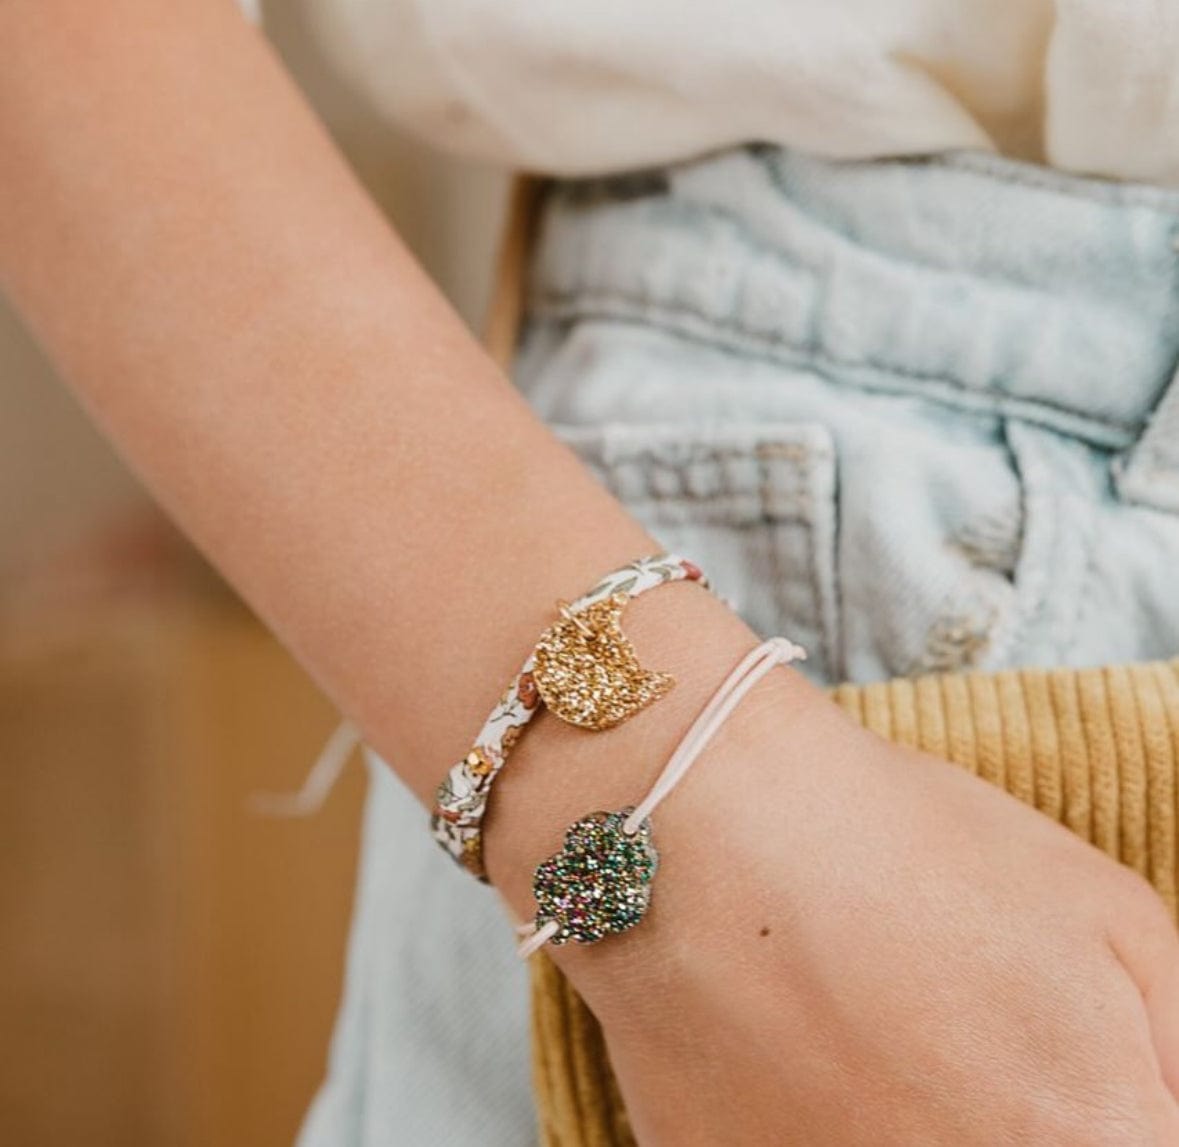 Liberty Ava Spring Bracelet with Gold Heart by Luciole et Petit Pois